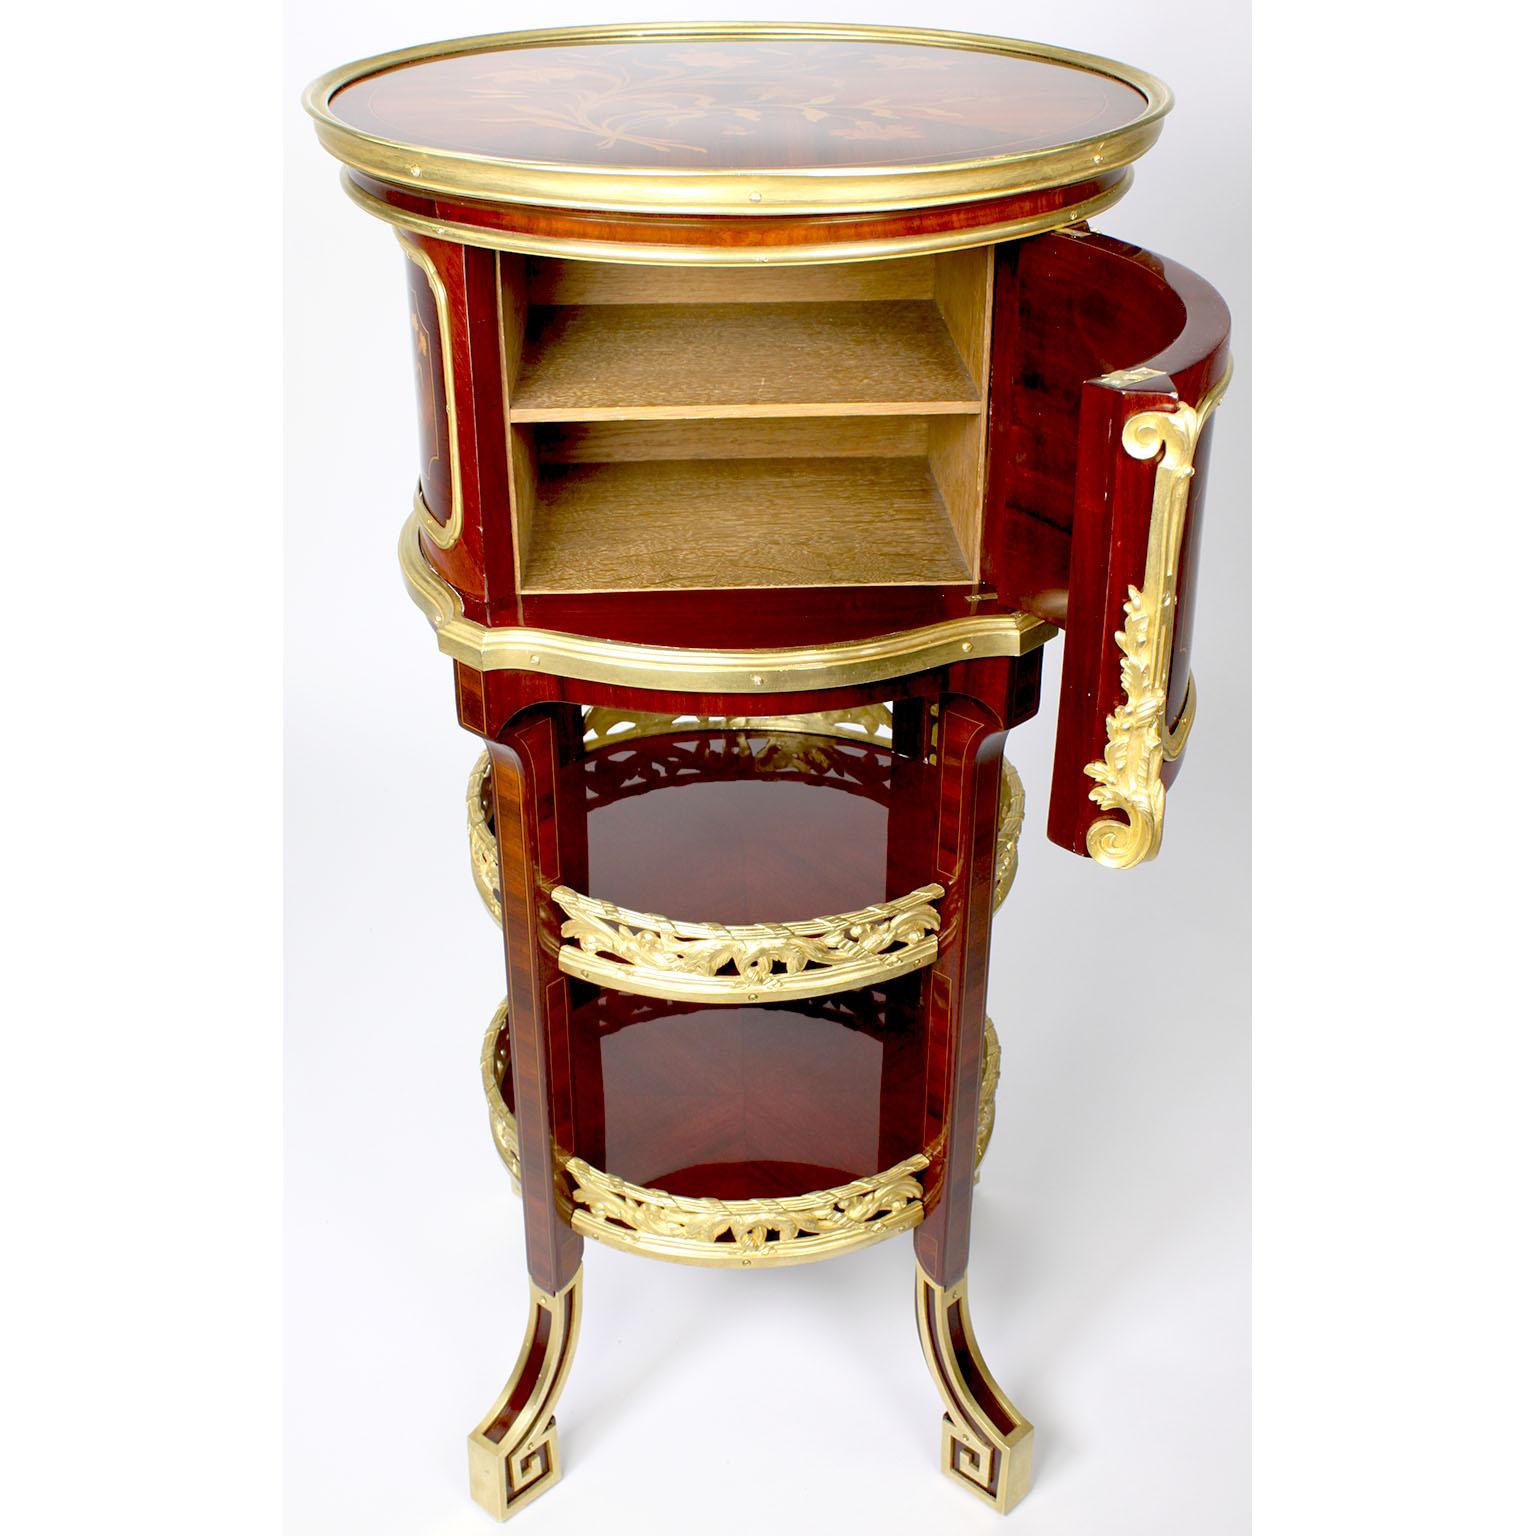 Pr French 19th-20th Century Ormolu Mounted Side-Tables Zwiener-Jansen Successeur For Sale 8